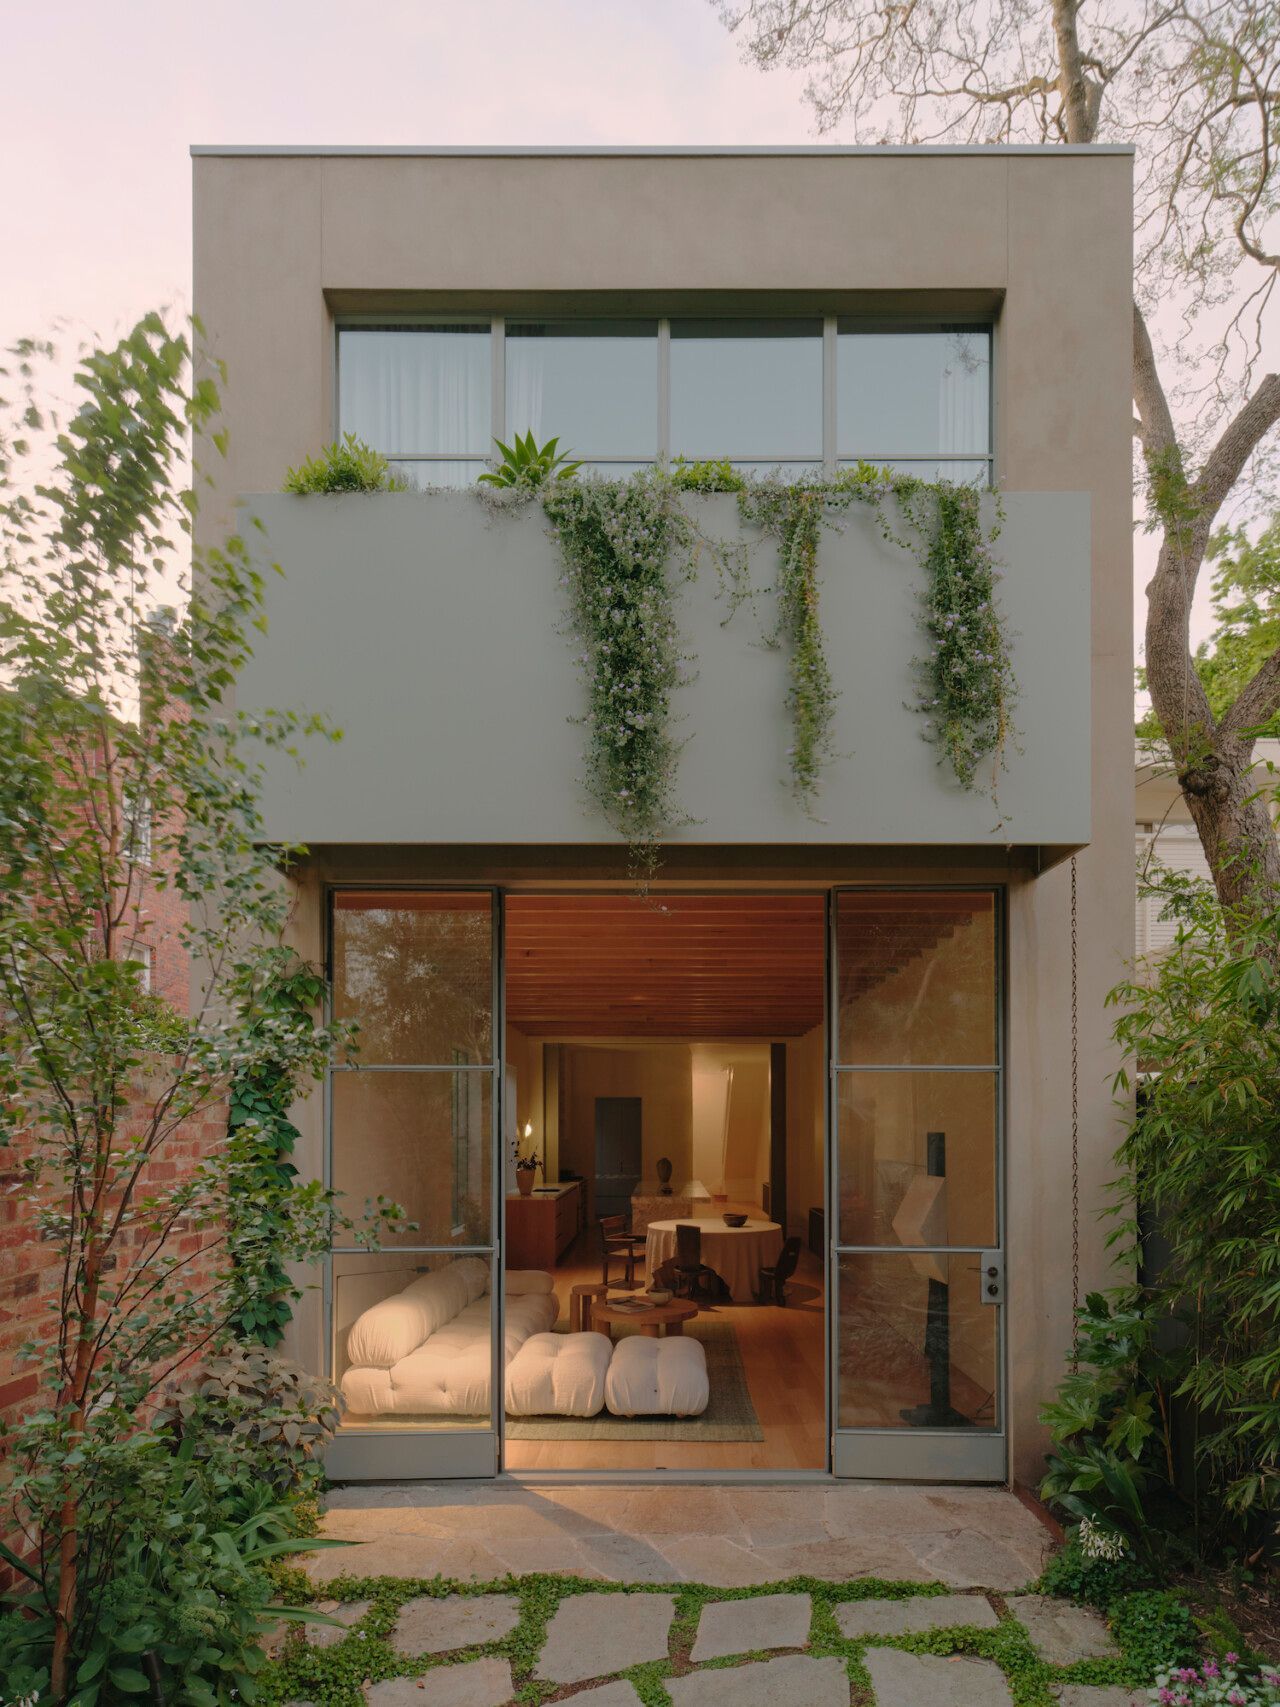 Simplicity in Garden Design: Embracing Minimalism for a Tranquil Outdoor Oasis